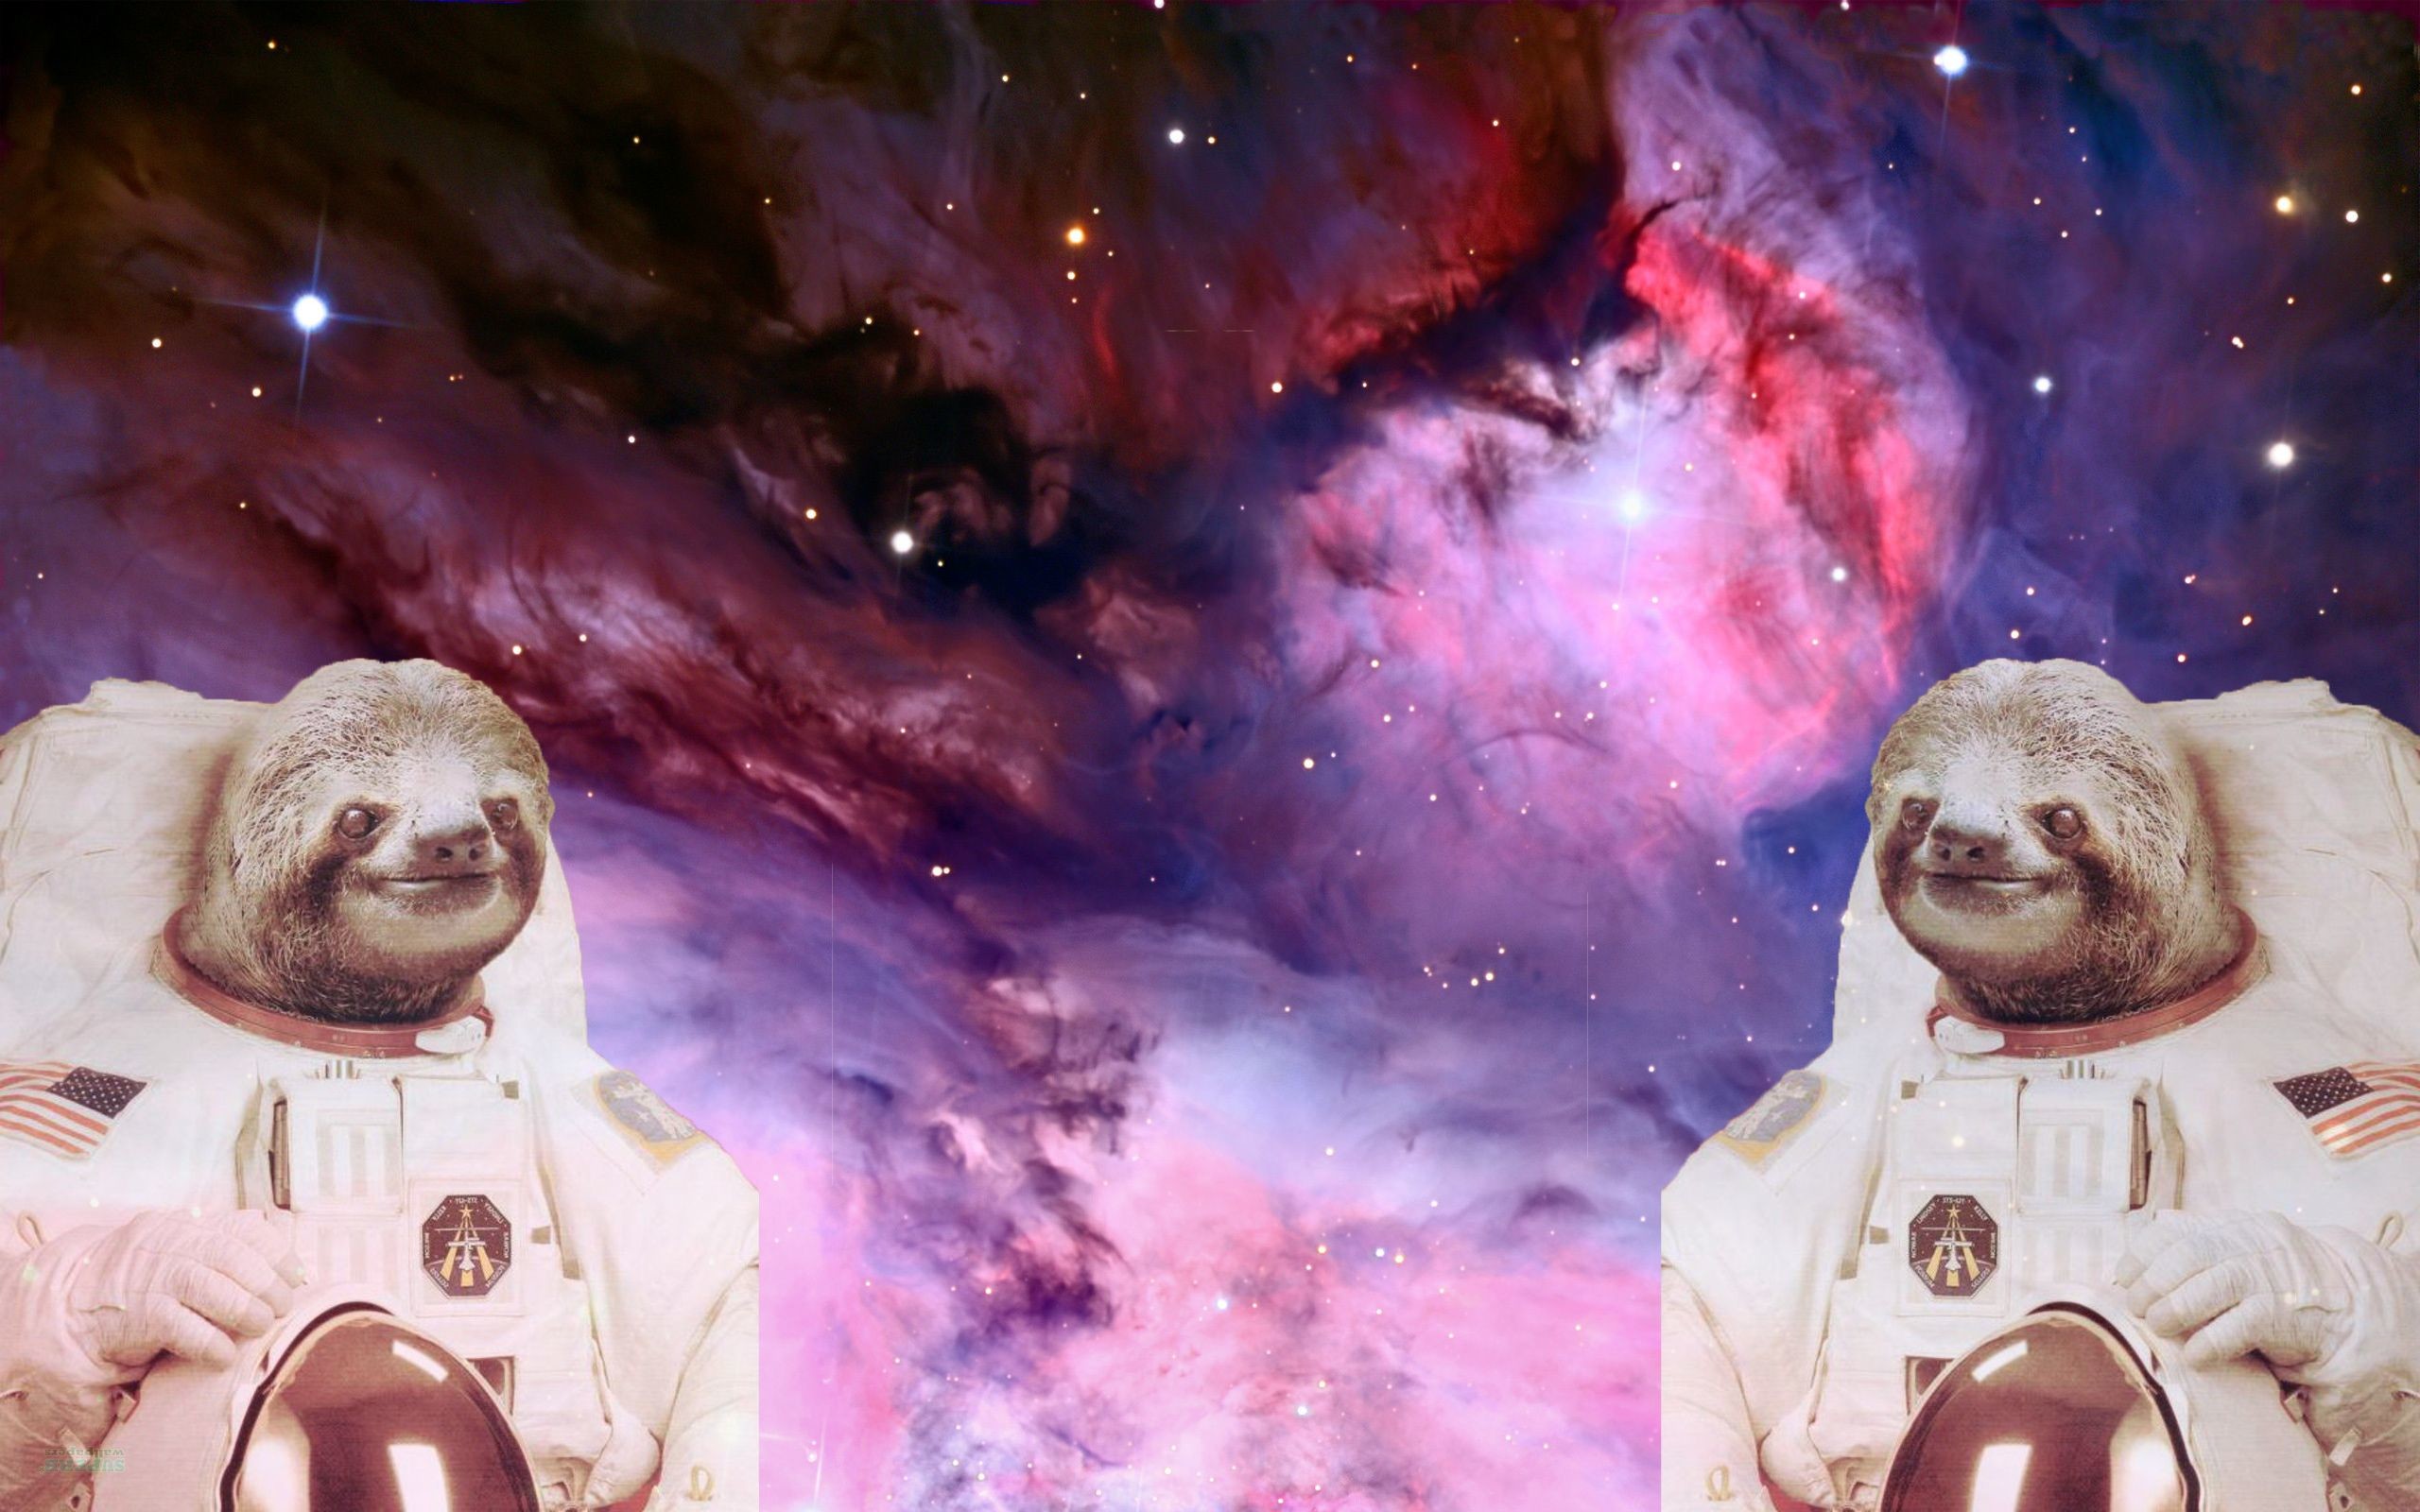 2560x1600 Astronaut Sloths in Space wallpaper I made